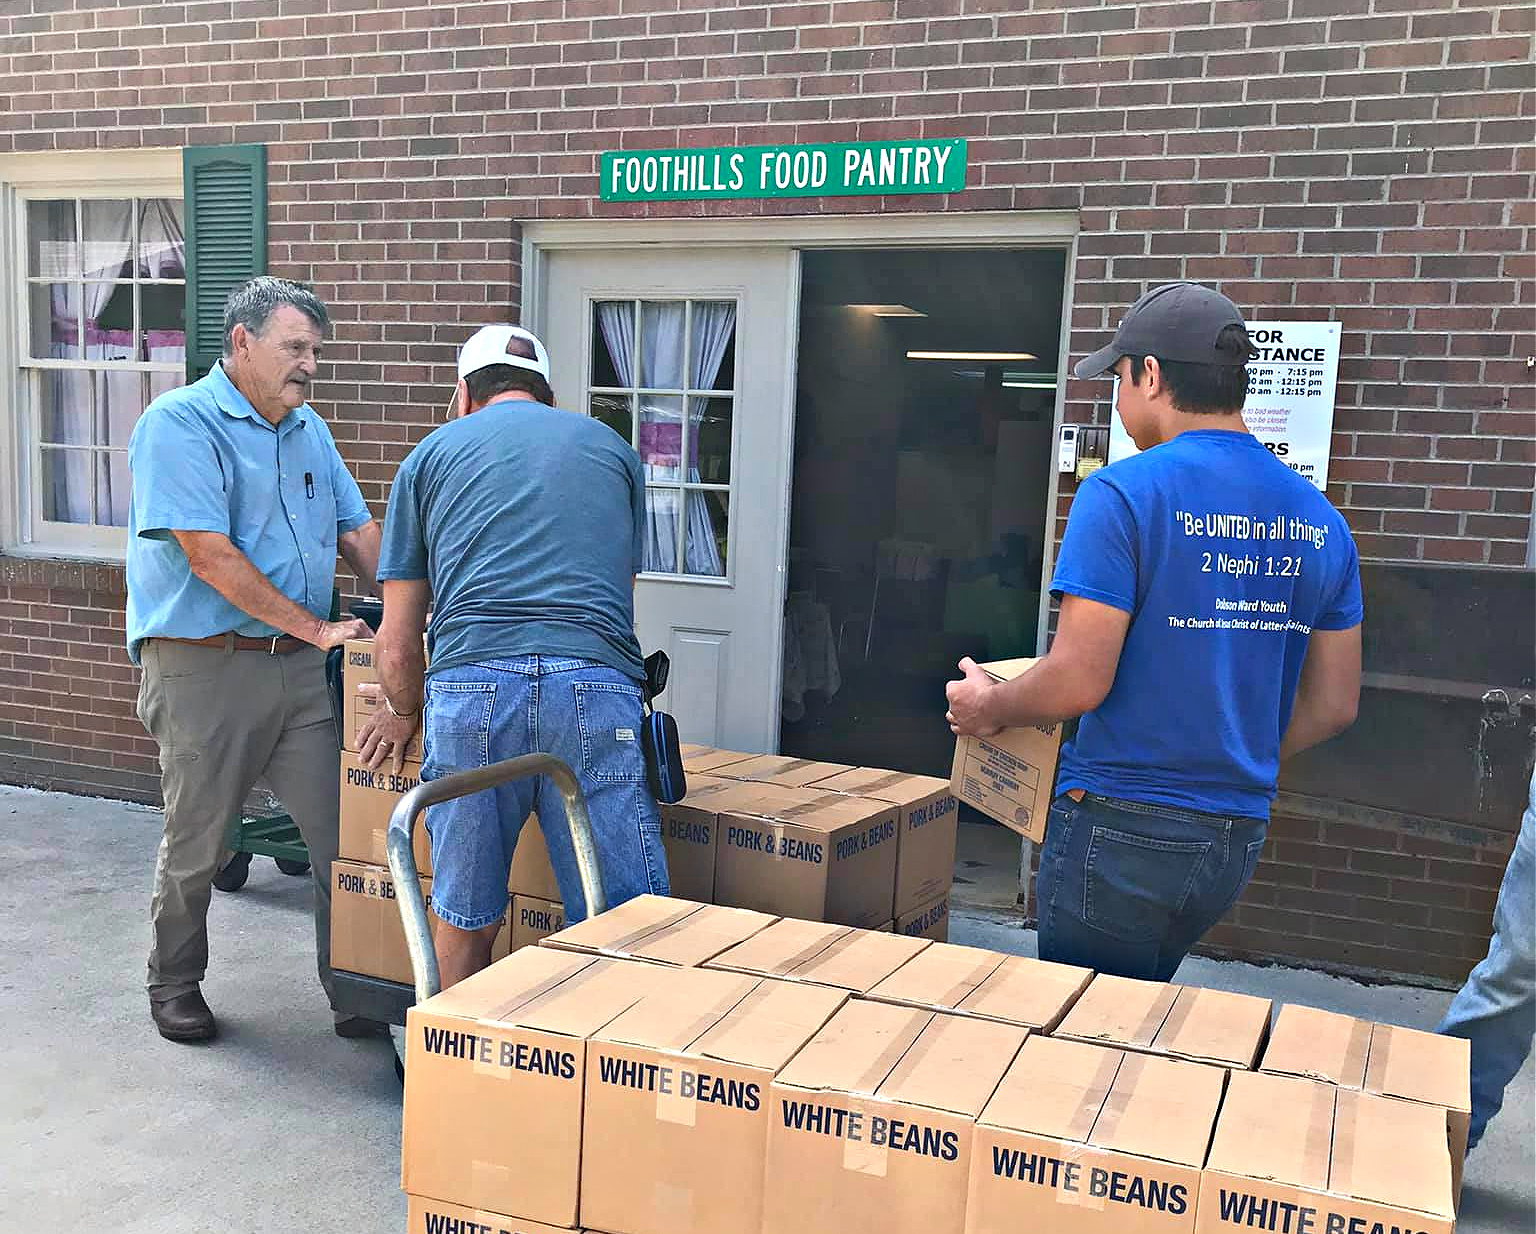 Dobson church members had the opportunity to help deliver food to local food pantries.